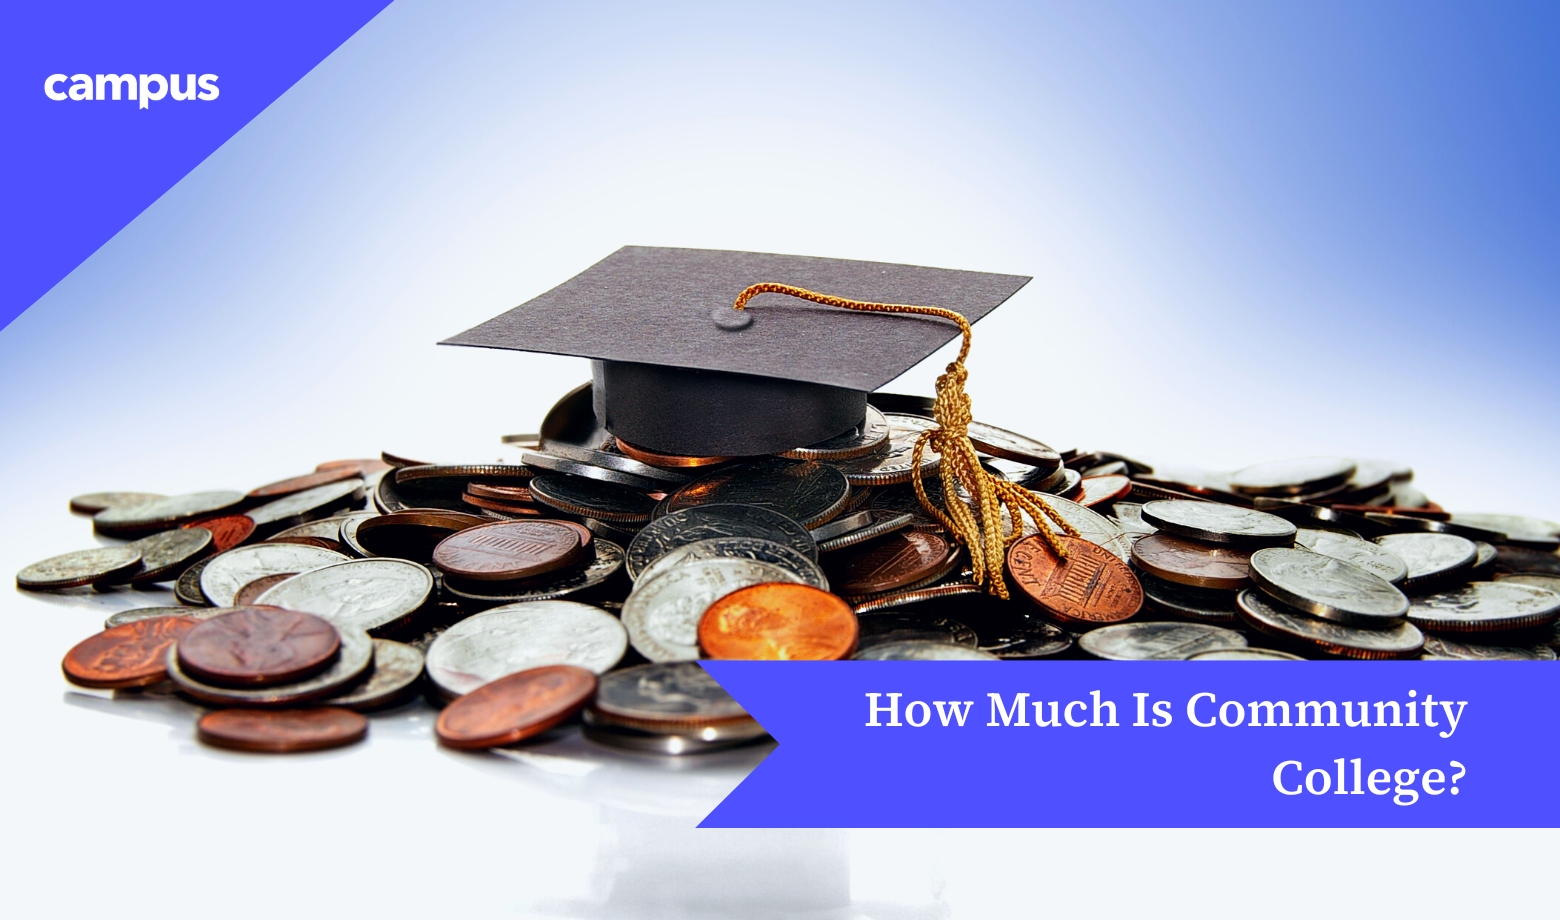 How Much is Community College?